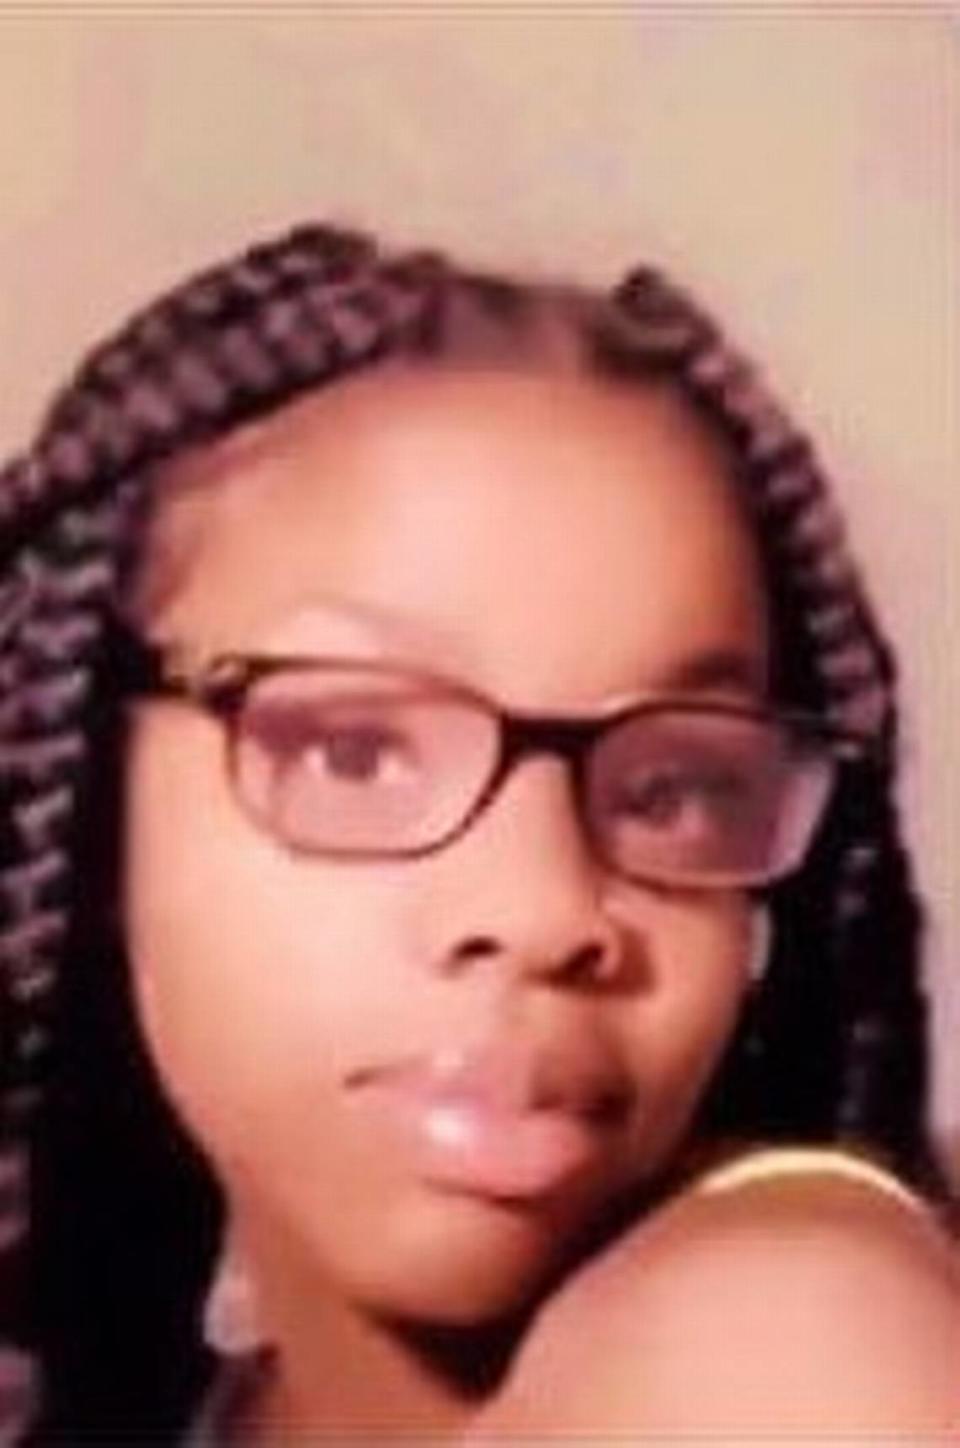 Uche Uwagwu is a Black girl who went missing in Euless on April 2020 when she was 16 years old.